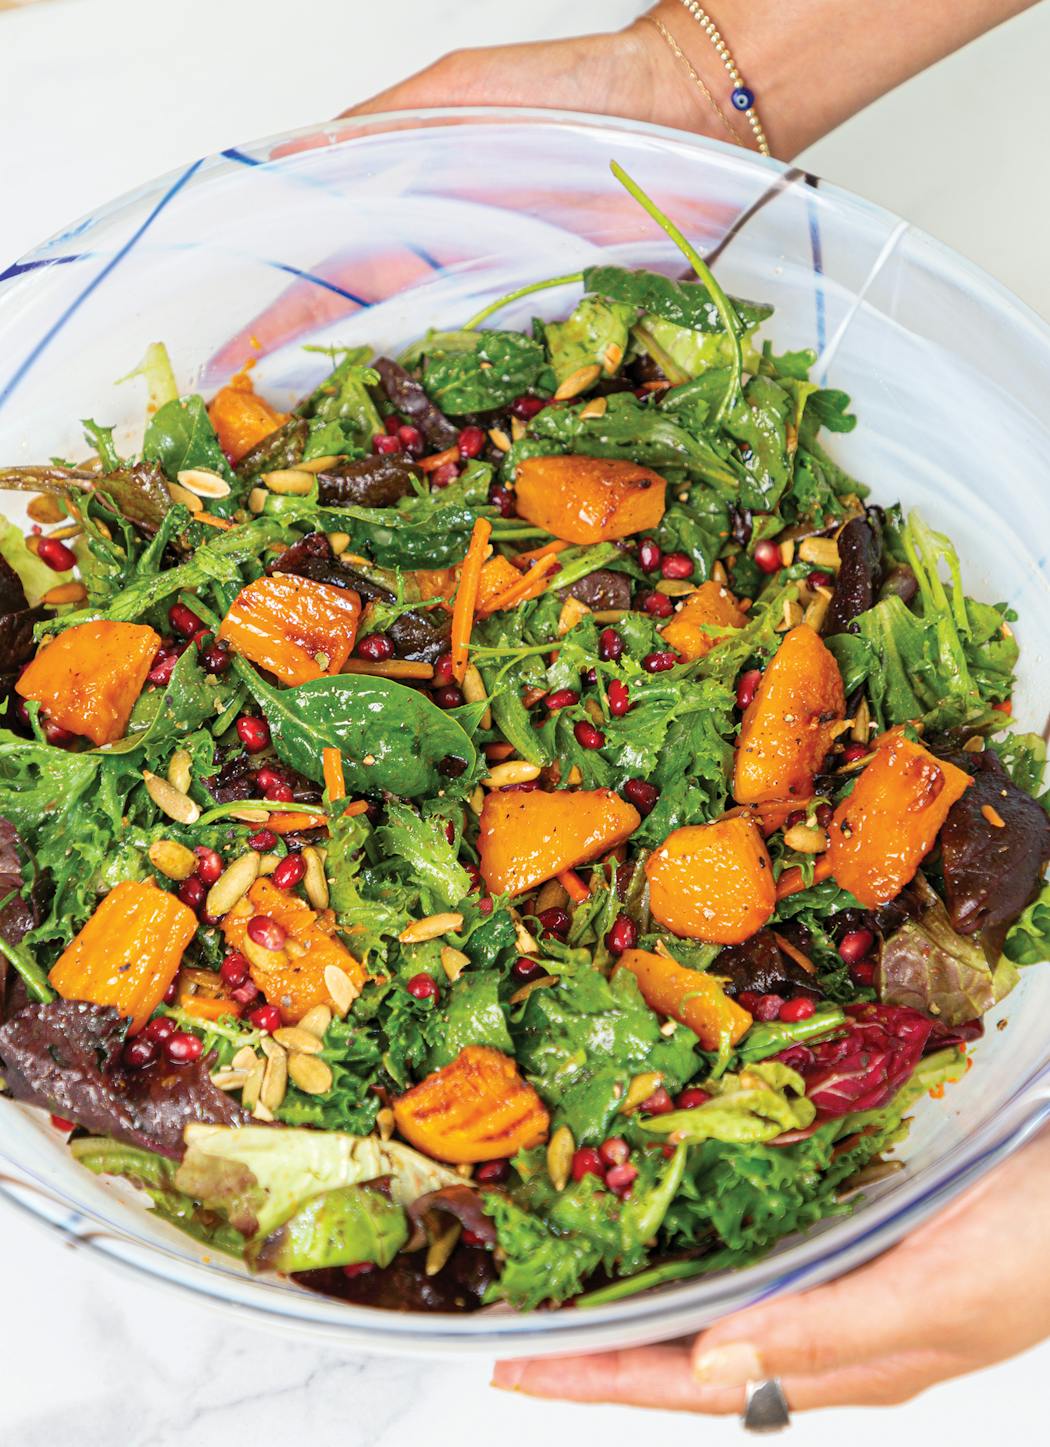 Squash Salad with Pomegranate Molasses Dressing embraces harvest flavors. From “Maman & Me,” by Roya Shariat and Gita Sadeh (PA Press, 2023).